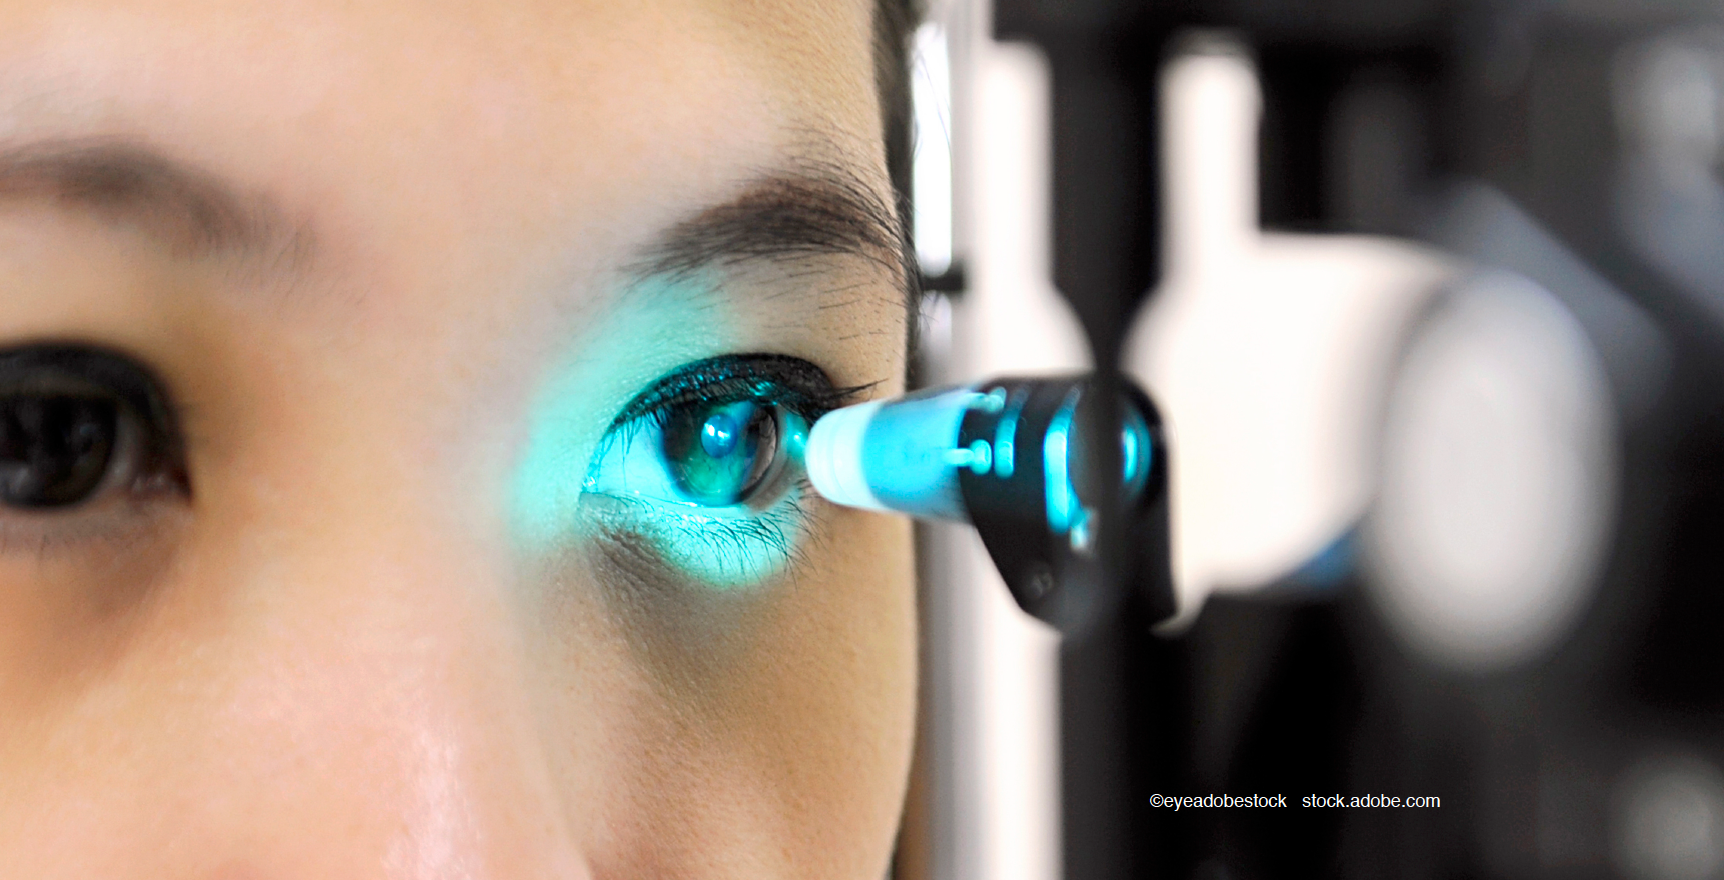 Novel devices, drugs driving expansion in glaucoma market